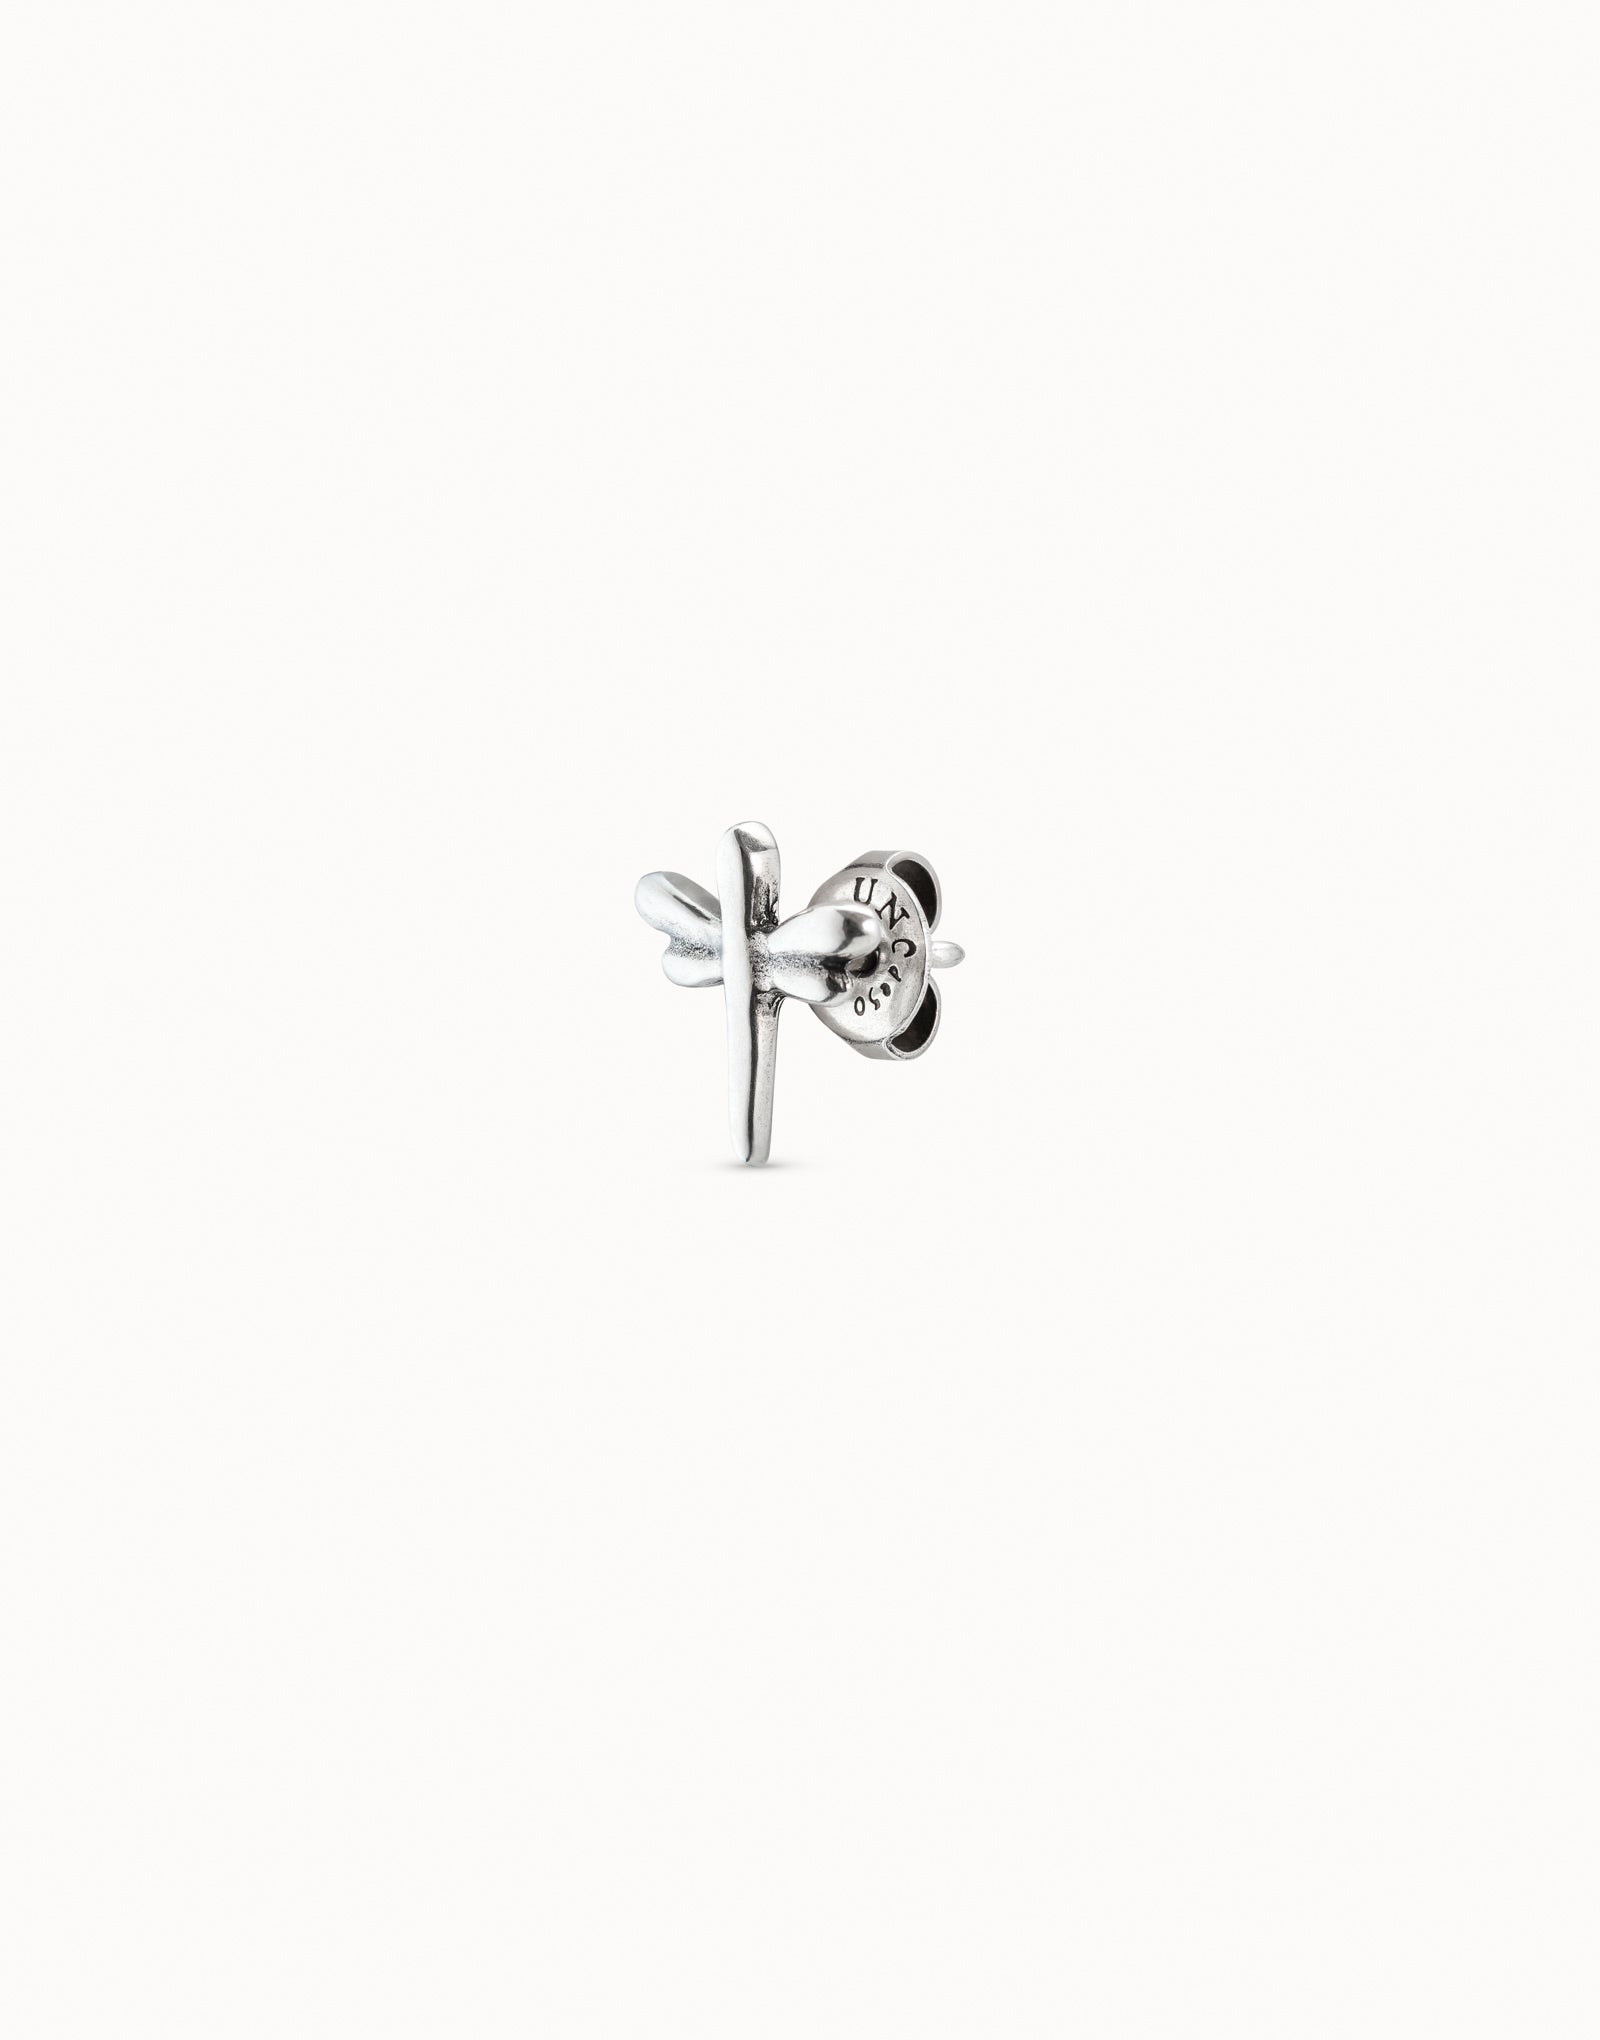 FLY HIGH DRAGONFLY STUD EARRING SILVER